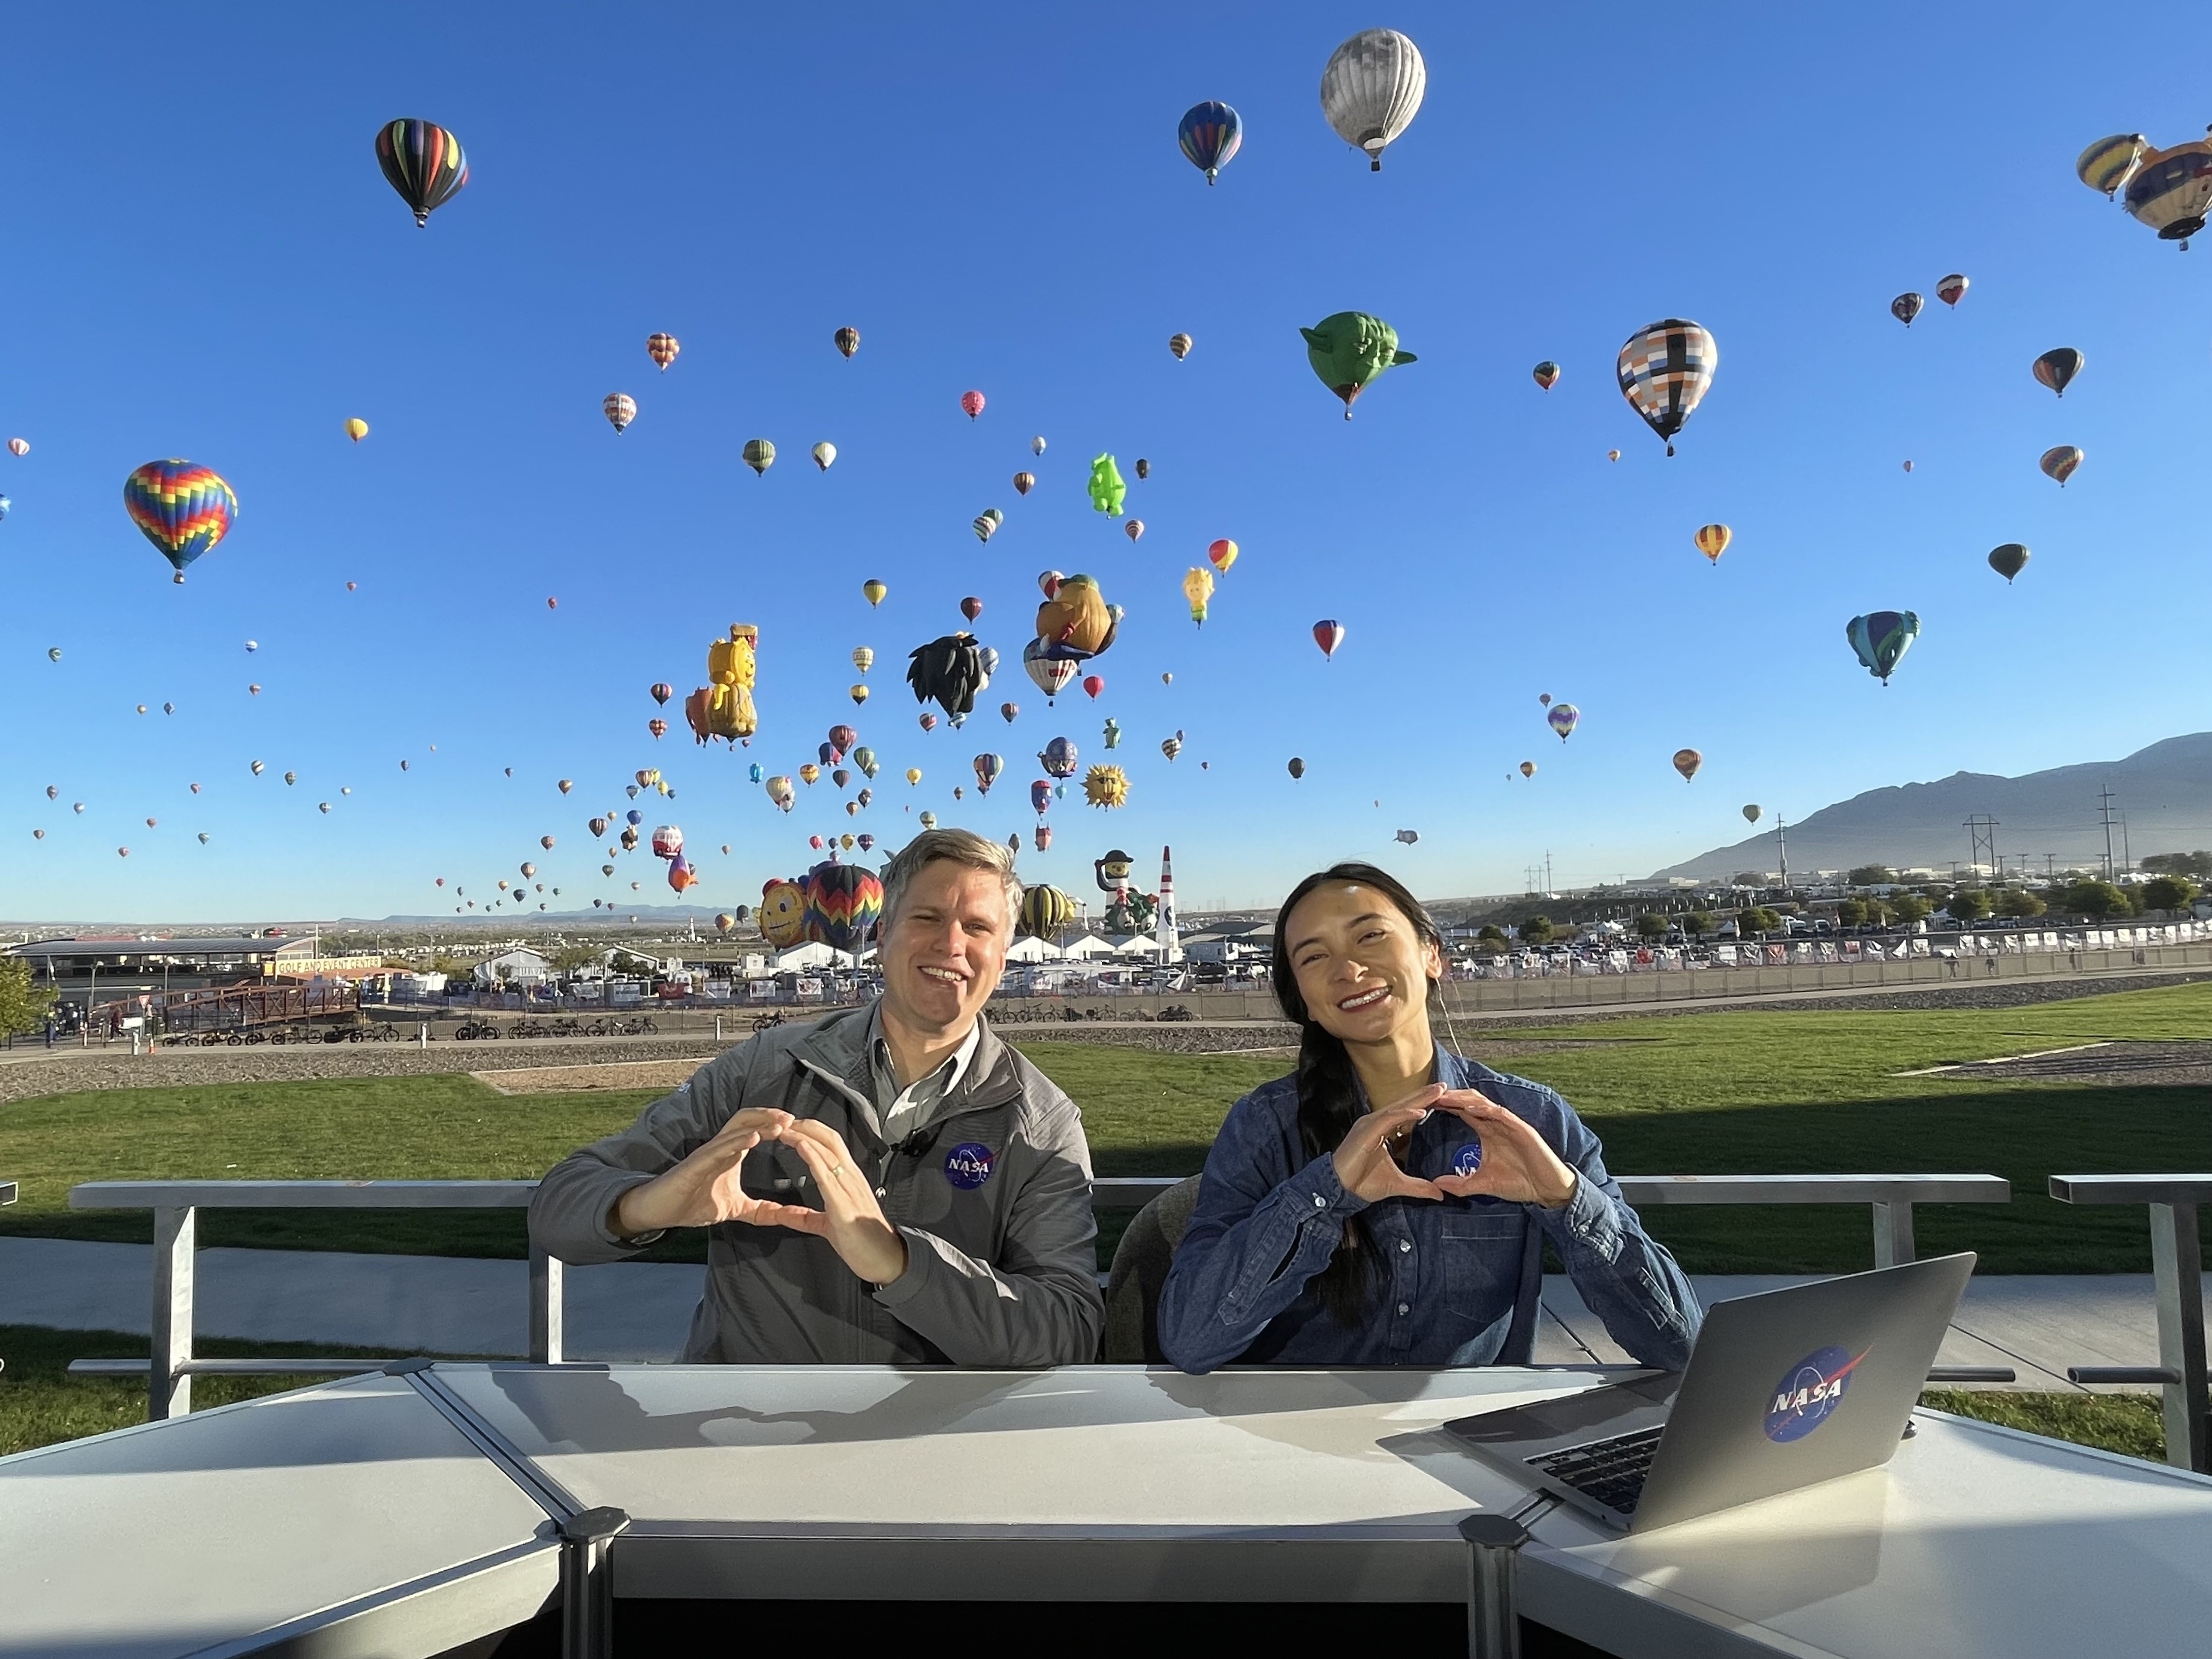 A man and a woman sit at a desk, making hearts with their hands. Behind them is a large green field, with many hot air balloons on the field and in the sky